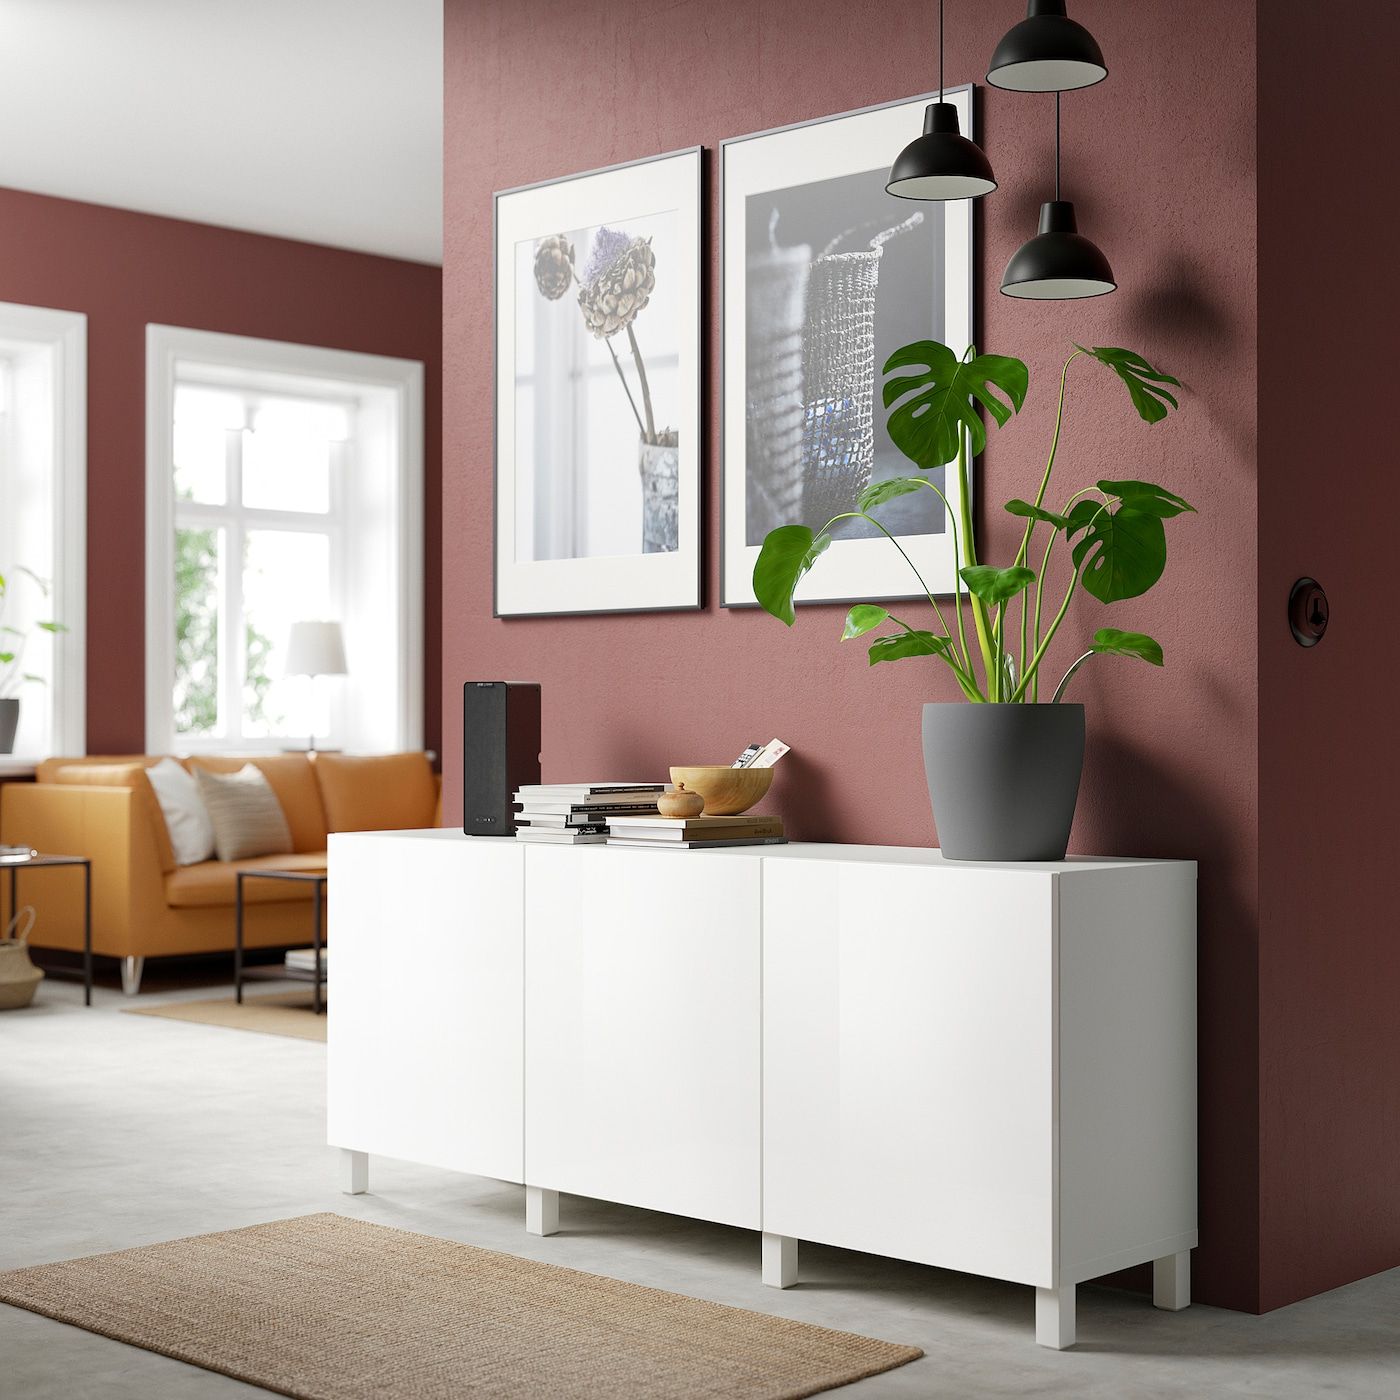 White Sideboards For Living Room Within Best And Newest Bestå Storage Combination With Doors, White/selsviken/stubbarp High Gloss/ White, 707/8x161/2x291/8" – Ikea (View 7 of 10)